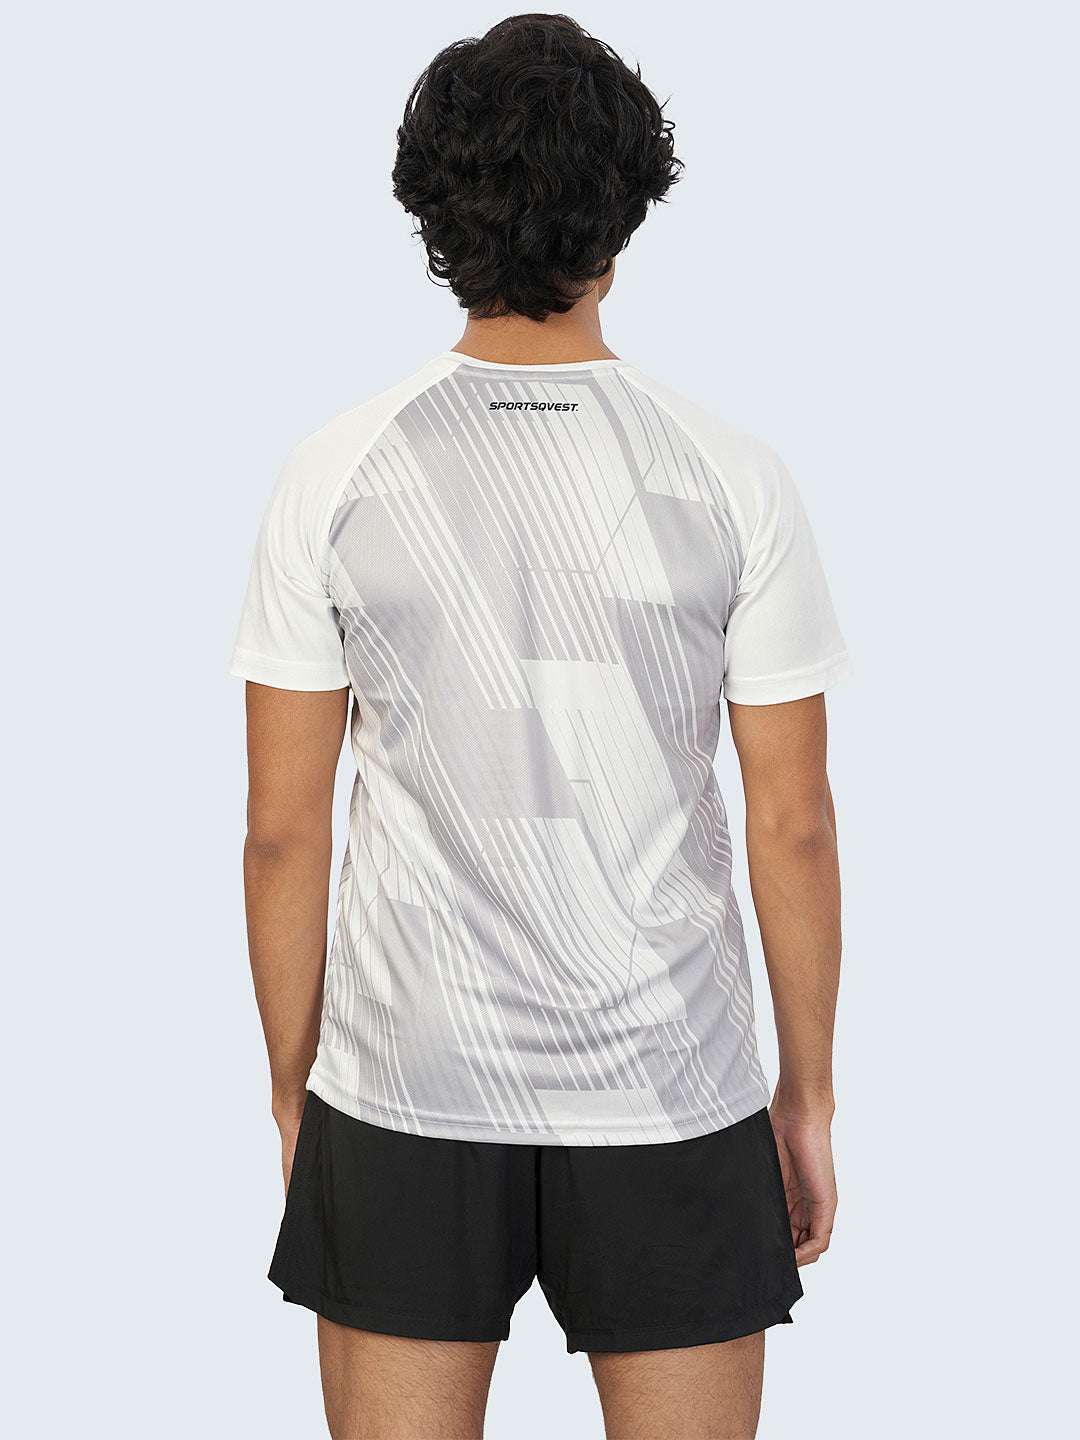 Men's Abstract Active Sports T-Shirt: White - Front